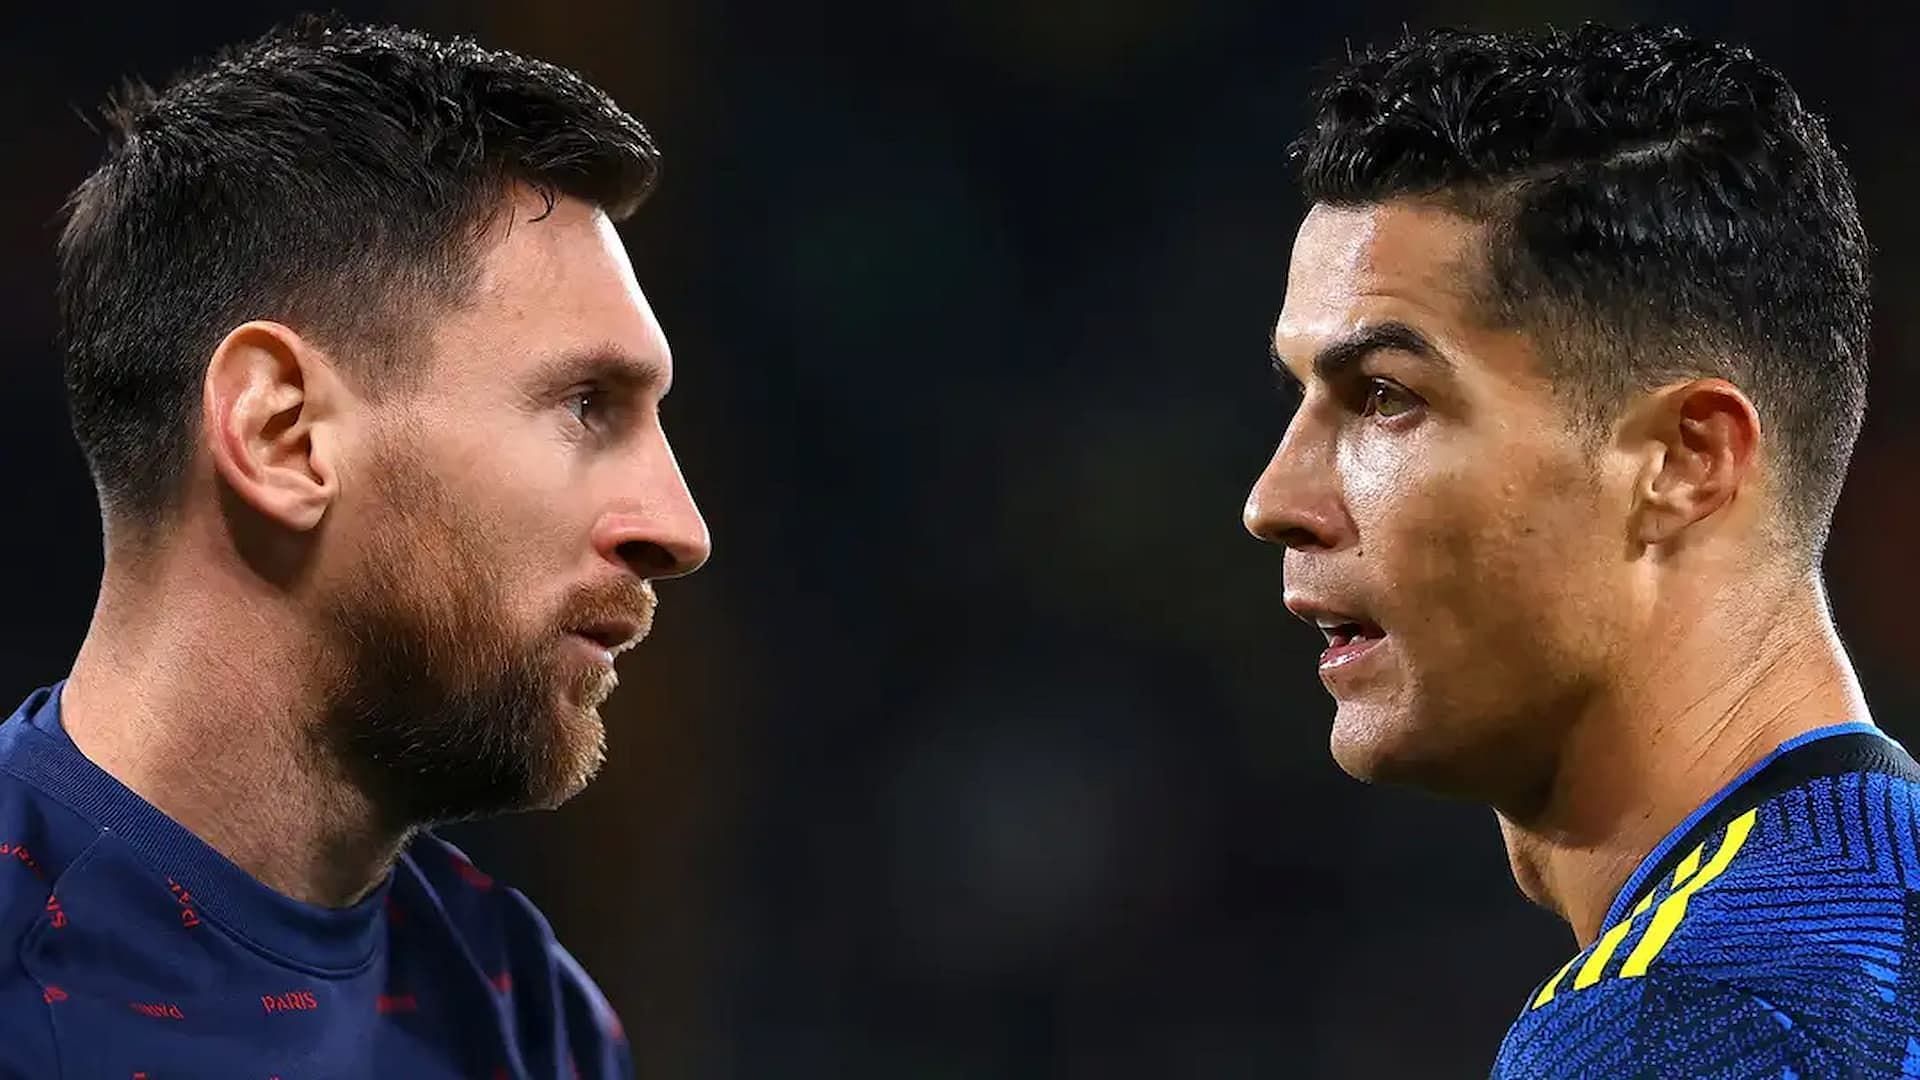 Speculations for Messi and Ronaldo in the next game